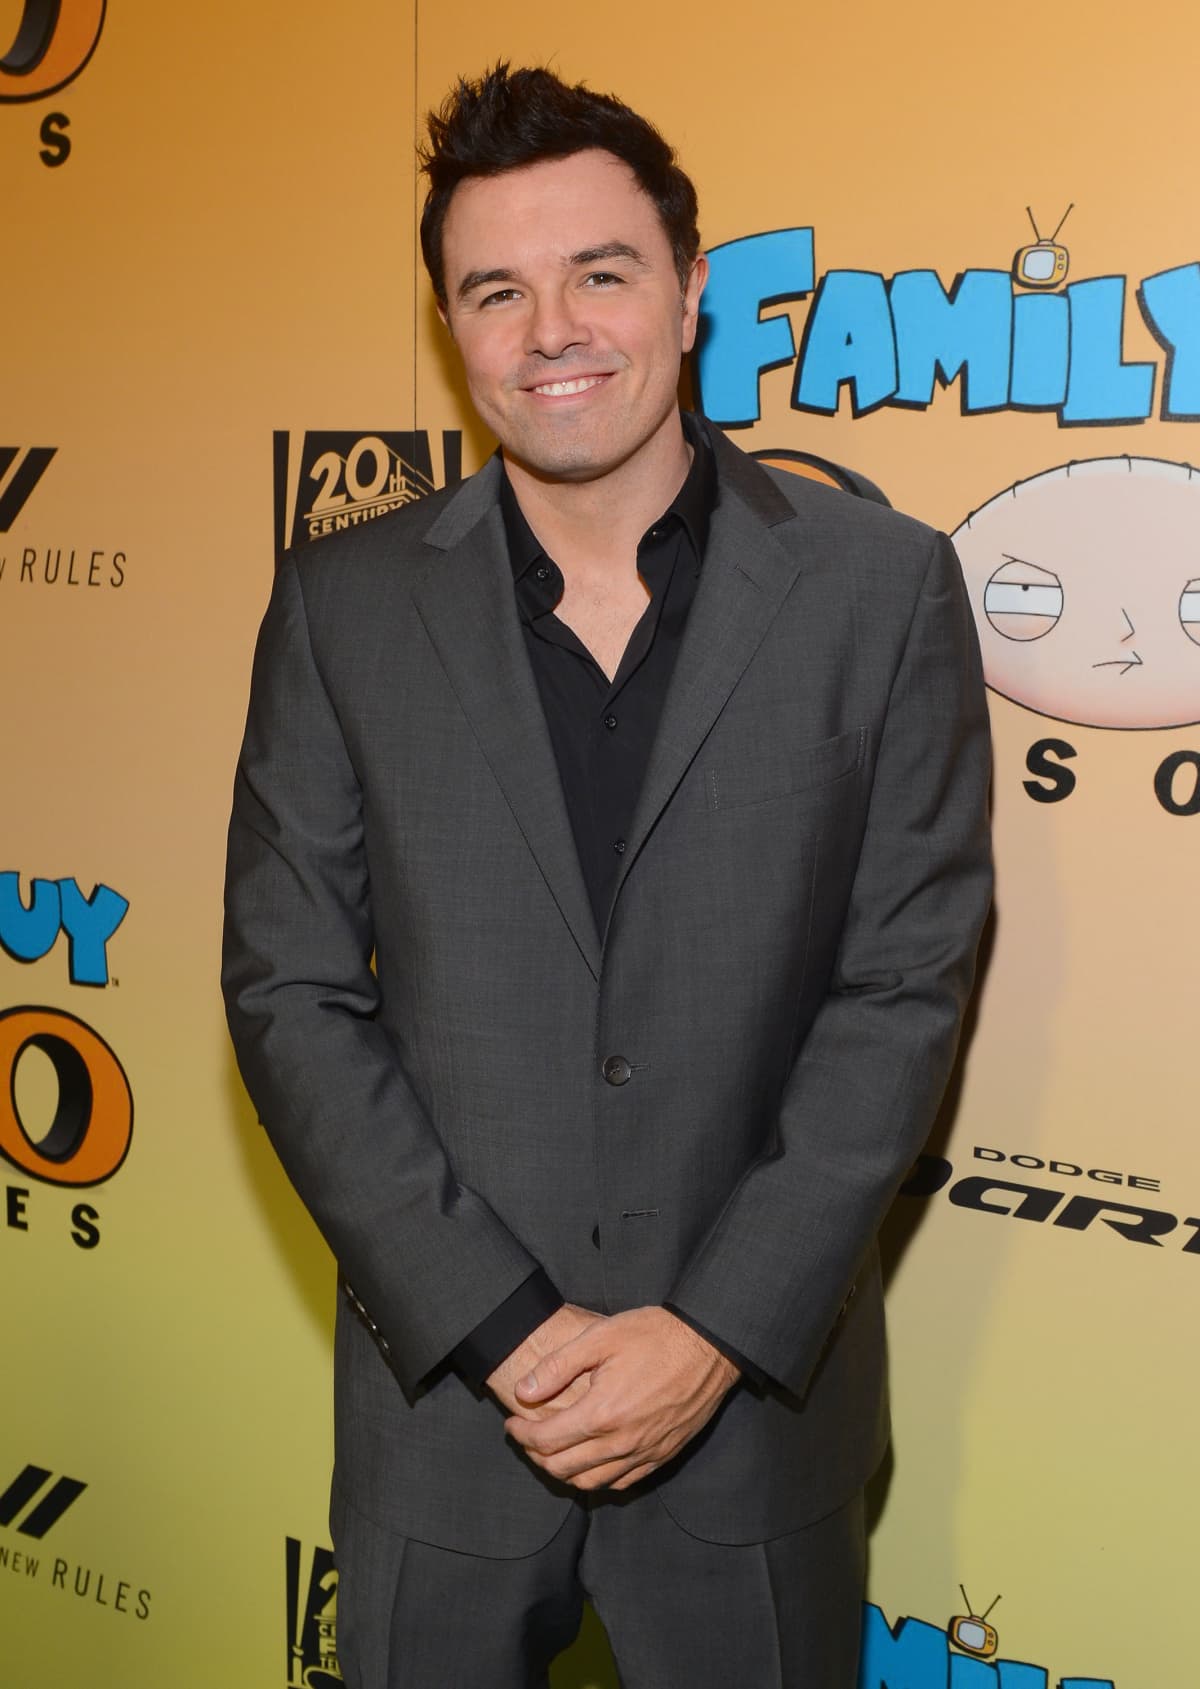 NEW YORK, NY - DECEMBER 18:  Seth MacFarlane visits Build Series to discuss "In Full Swing" at Build Studio on December 18, 2017 in New York City.  (Photo by Noam Galai/WireImage)